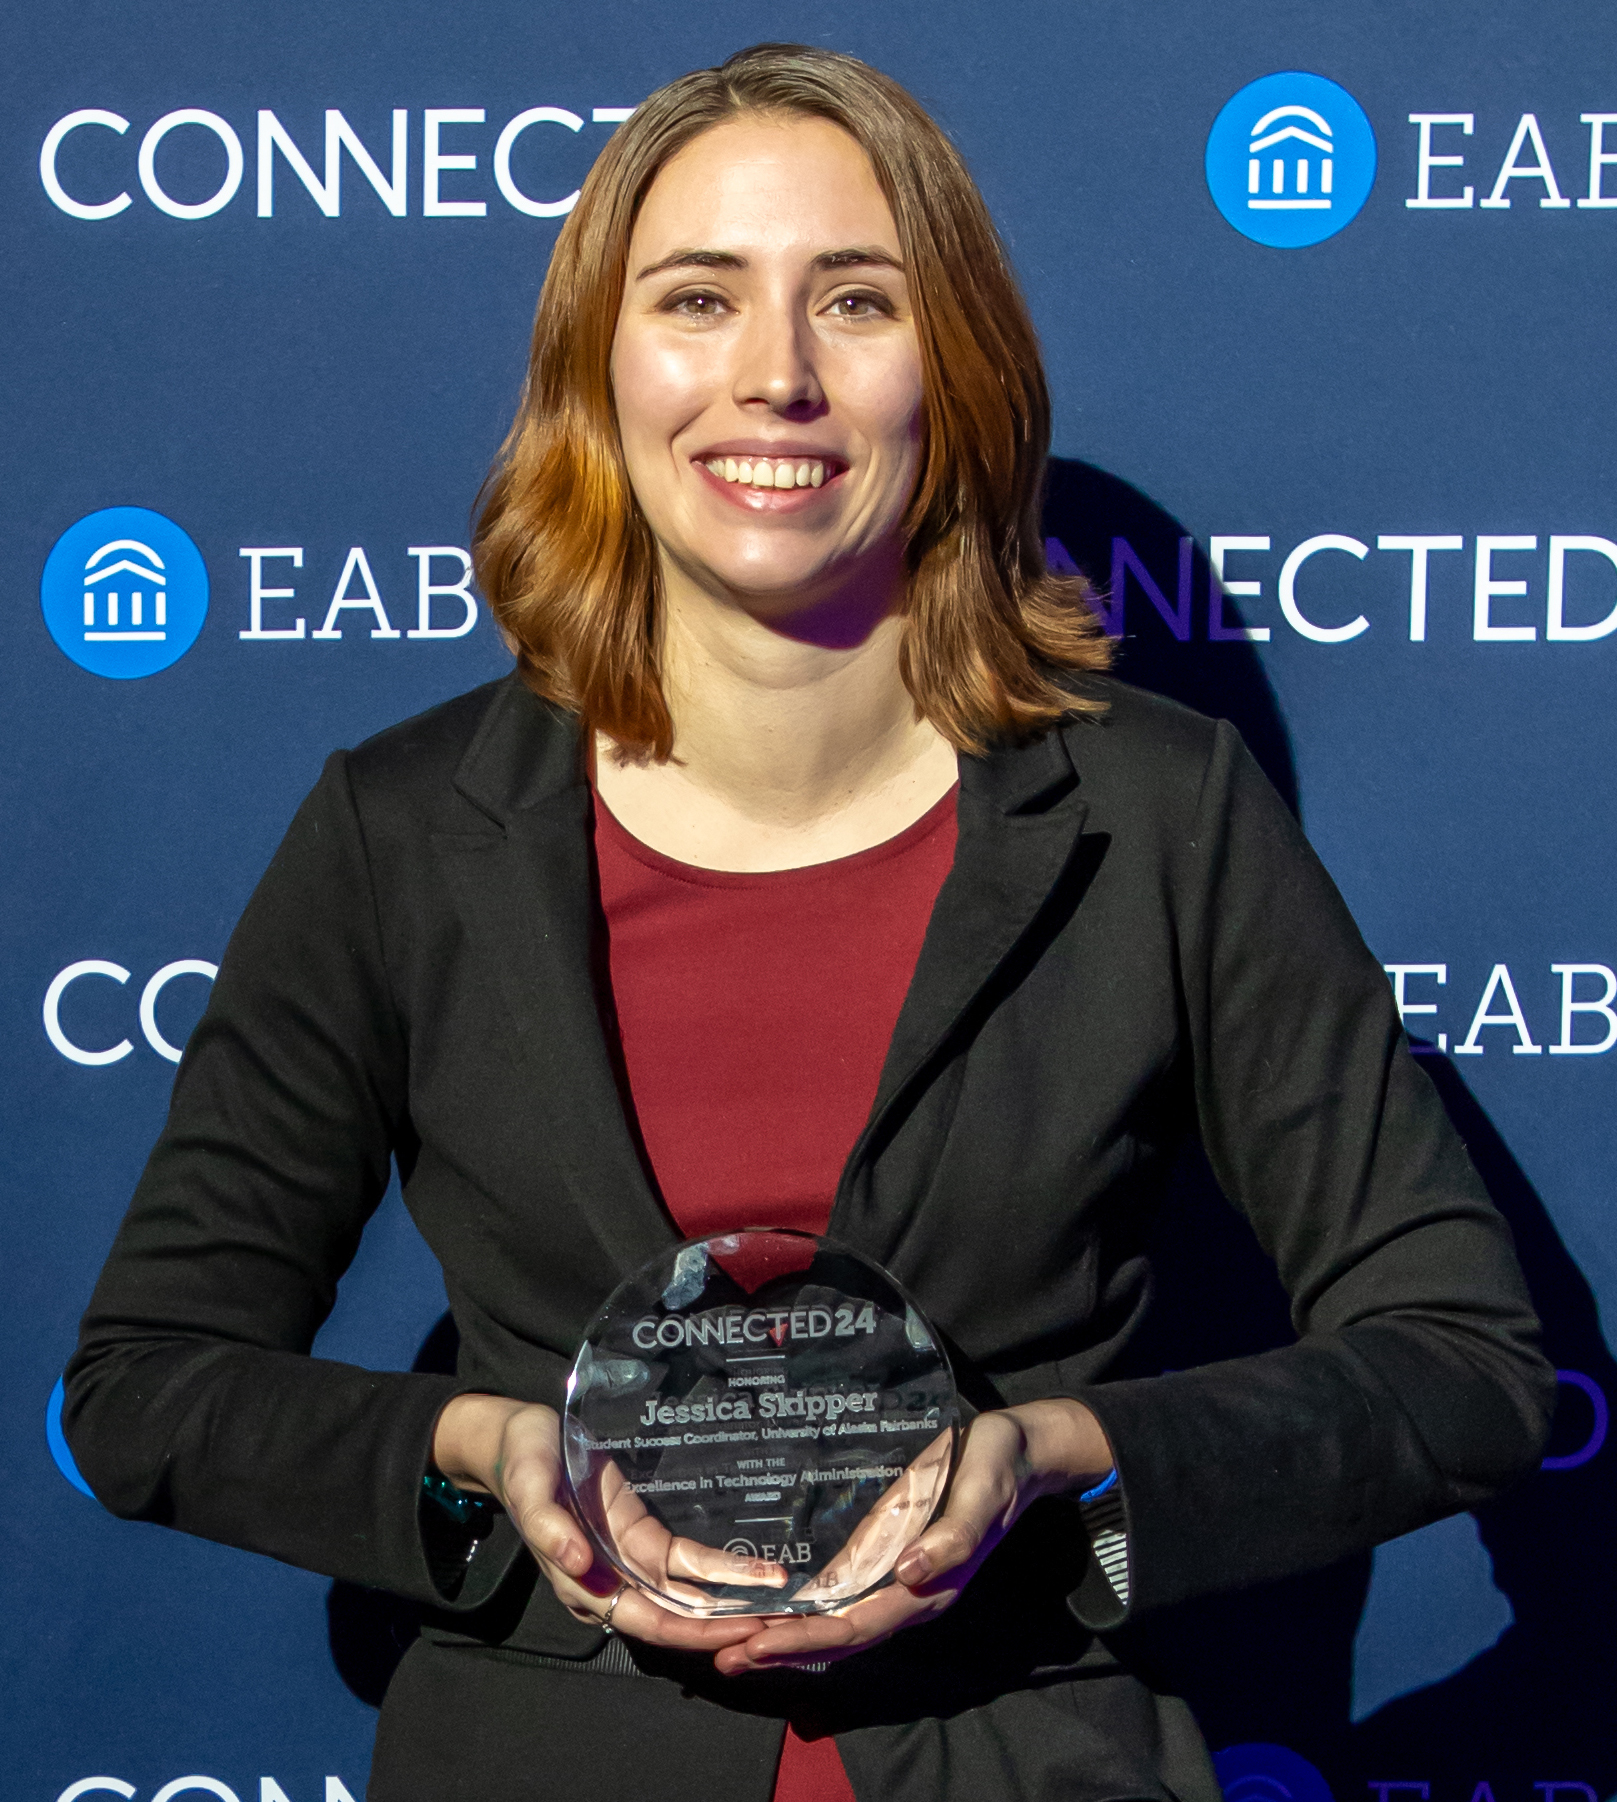 Jessica Skipper with her Excellence in Technology Administration Award from EAB presented at the CONNECTED24 conference.